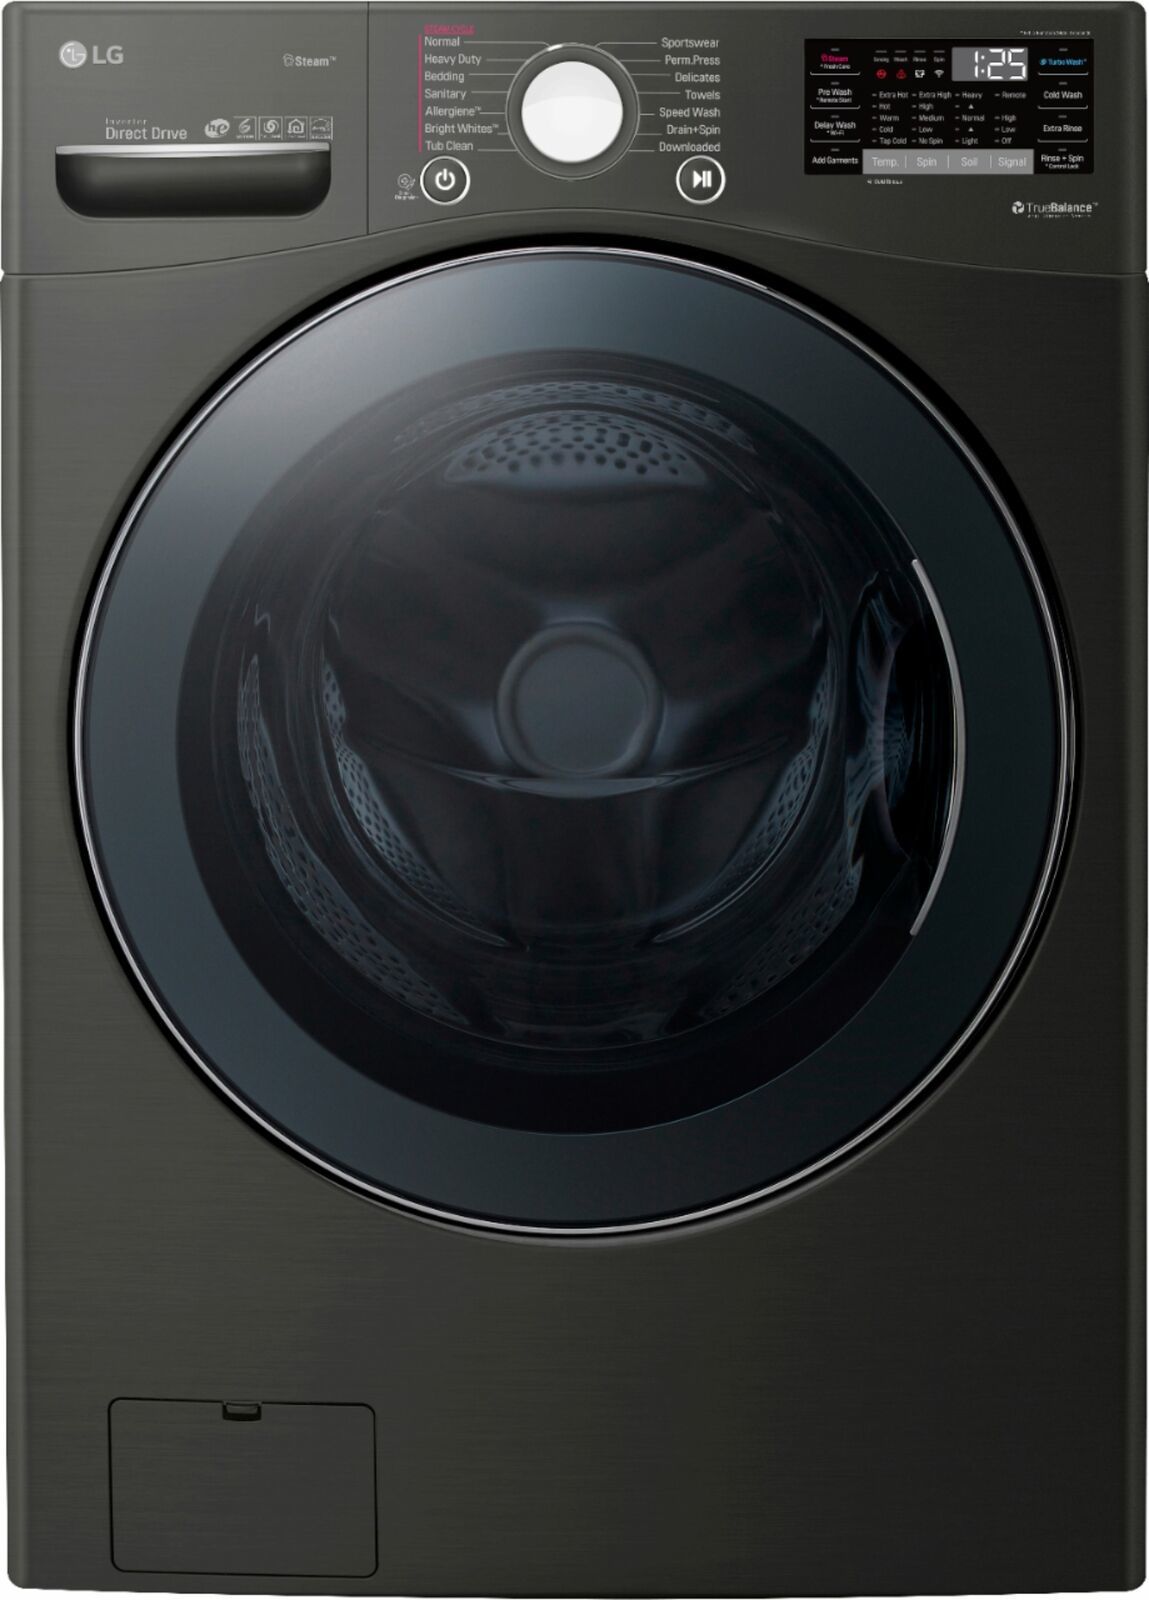 Primary image for LG WM3900HBA 4.5 Cu. Ft. Smart Front-Load Washer w/Steam TurboWash LOCAL PICK UP